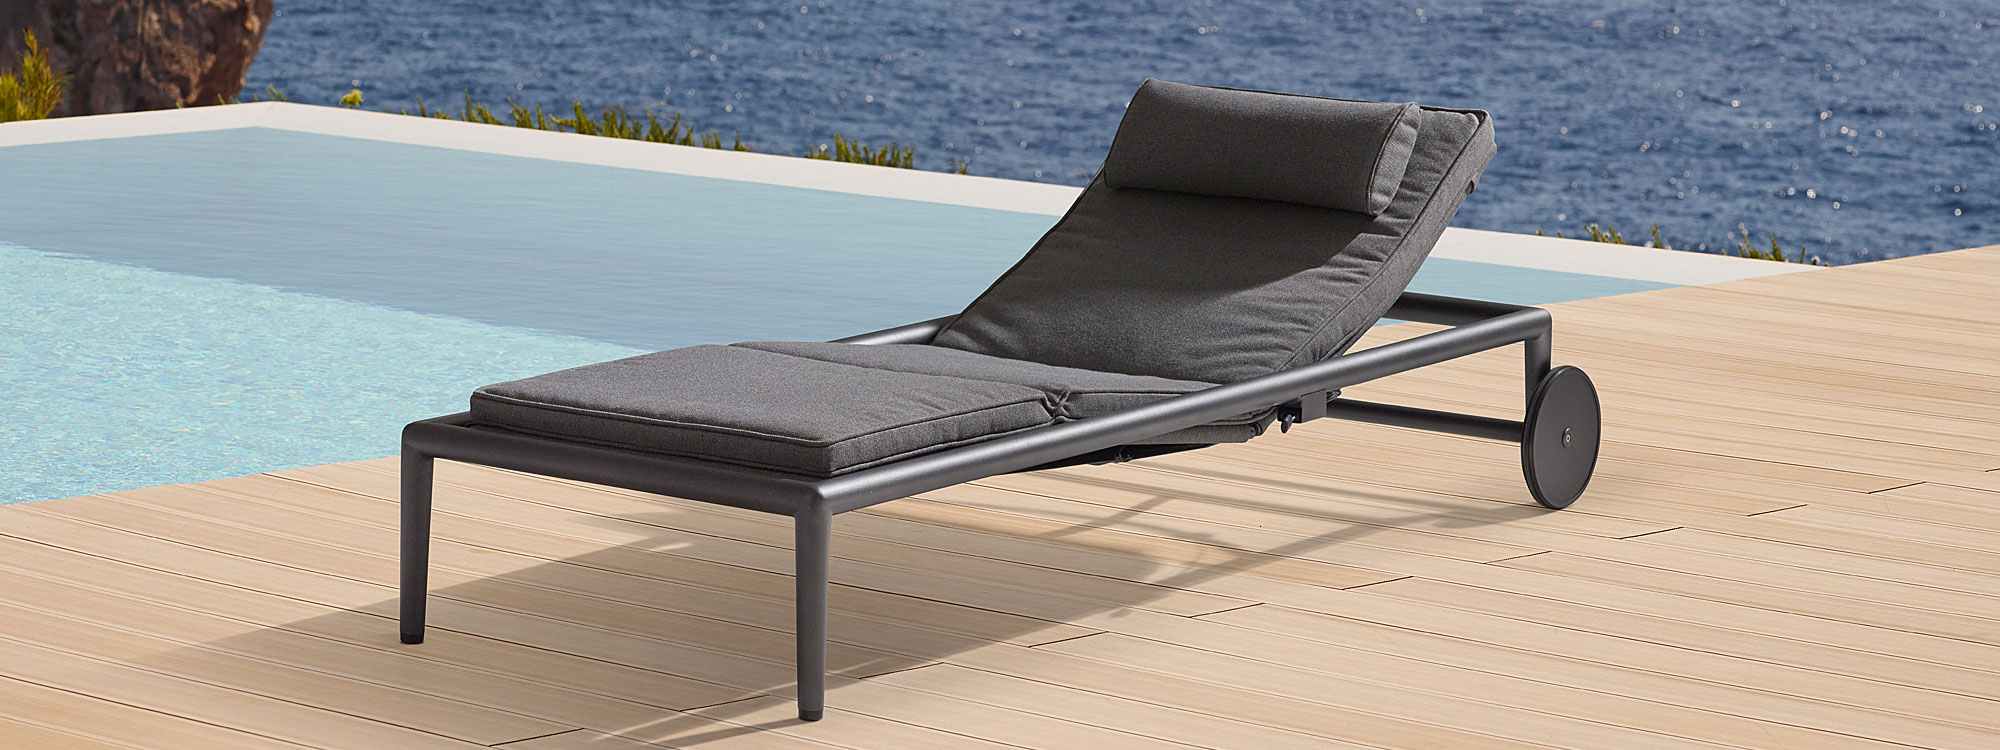 Image of grey Conic aluminium sun lounger with wheels by Cane-line, on decked poolside